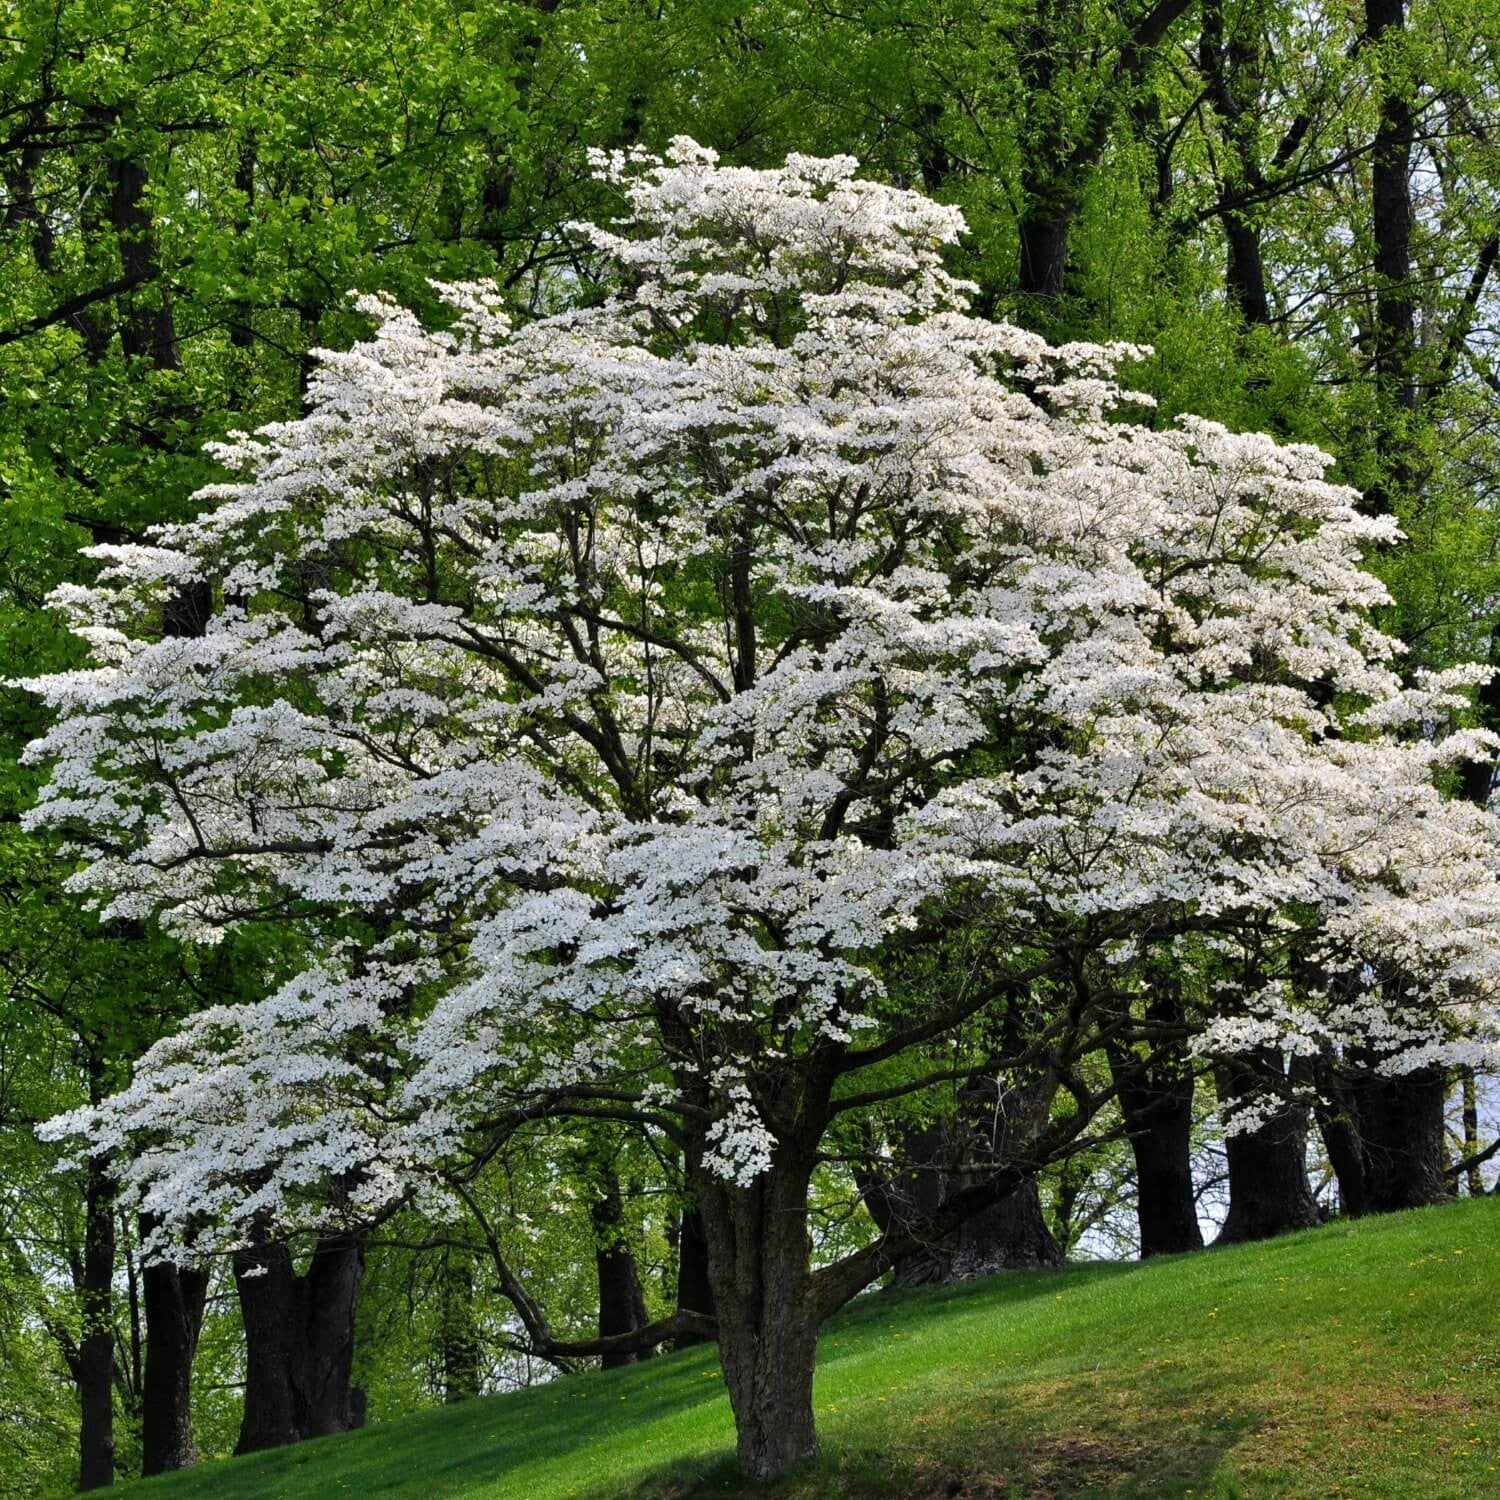 The White Dogwood: An American Favorite for Centuries